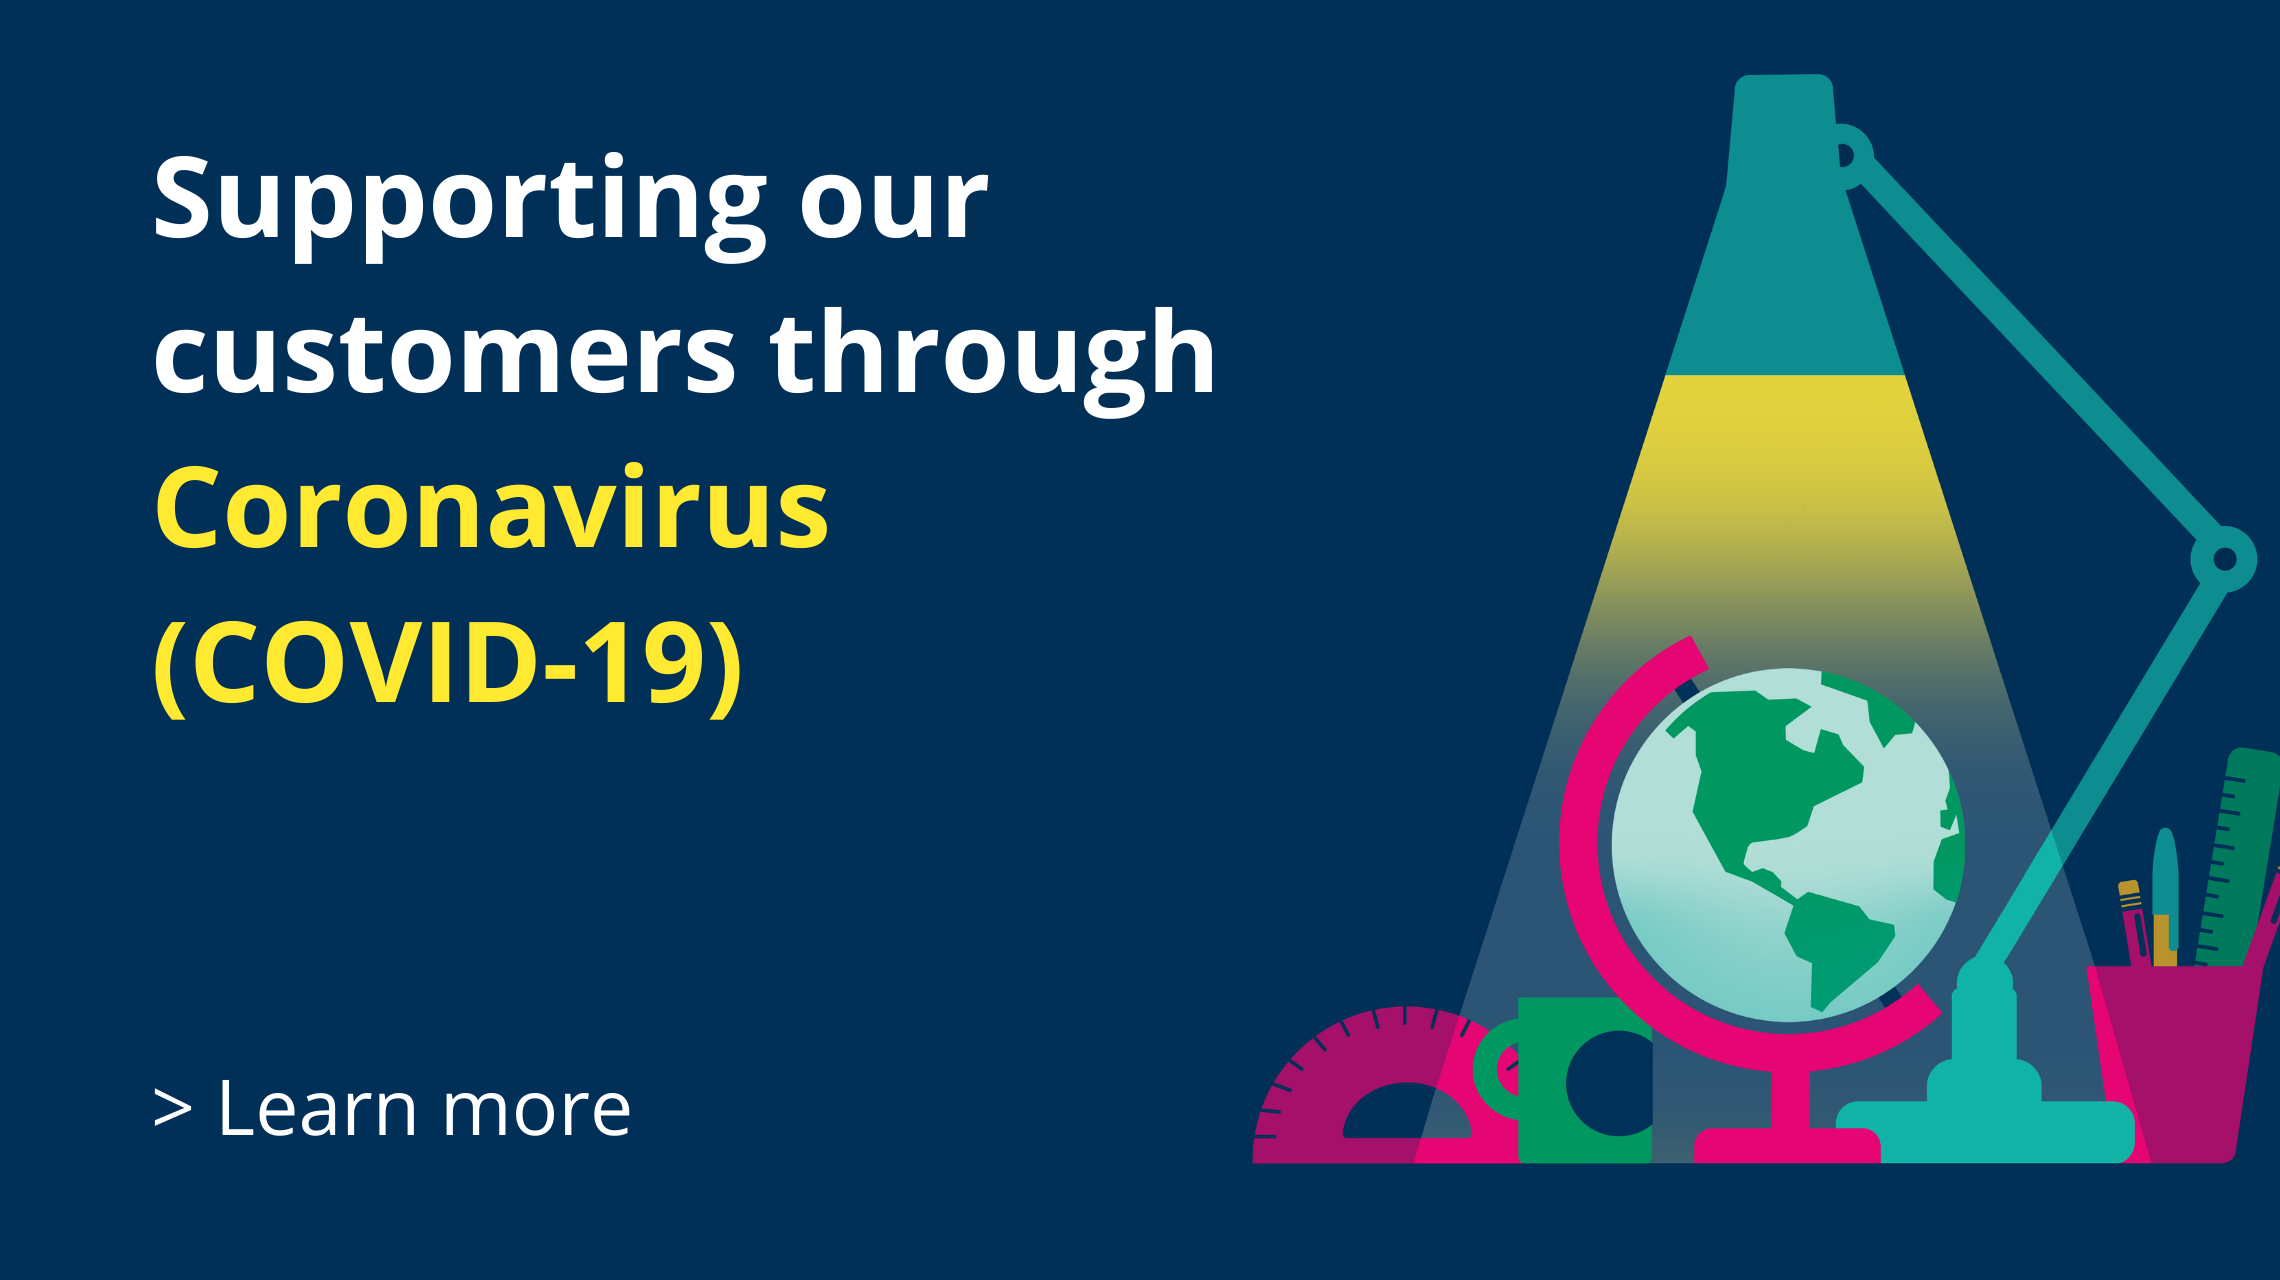 Supporting our customers during Coronavirus (COVID-19)